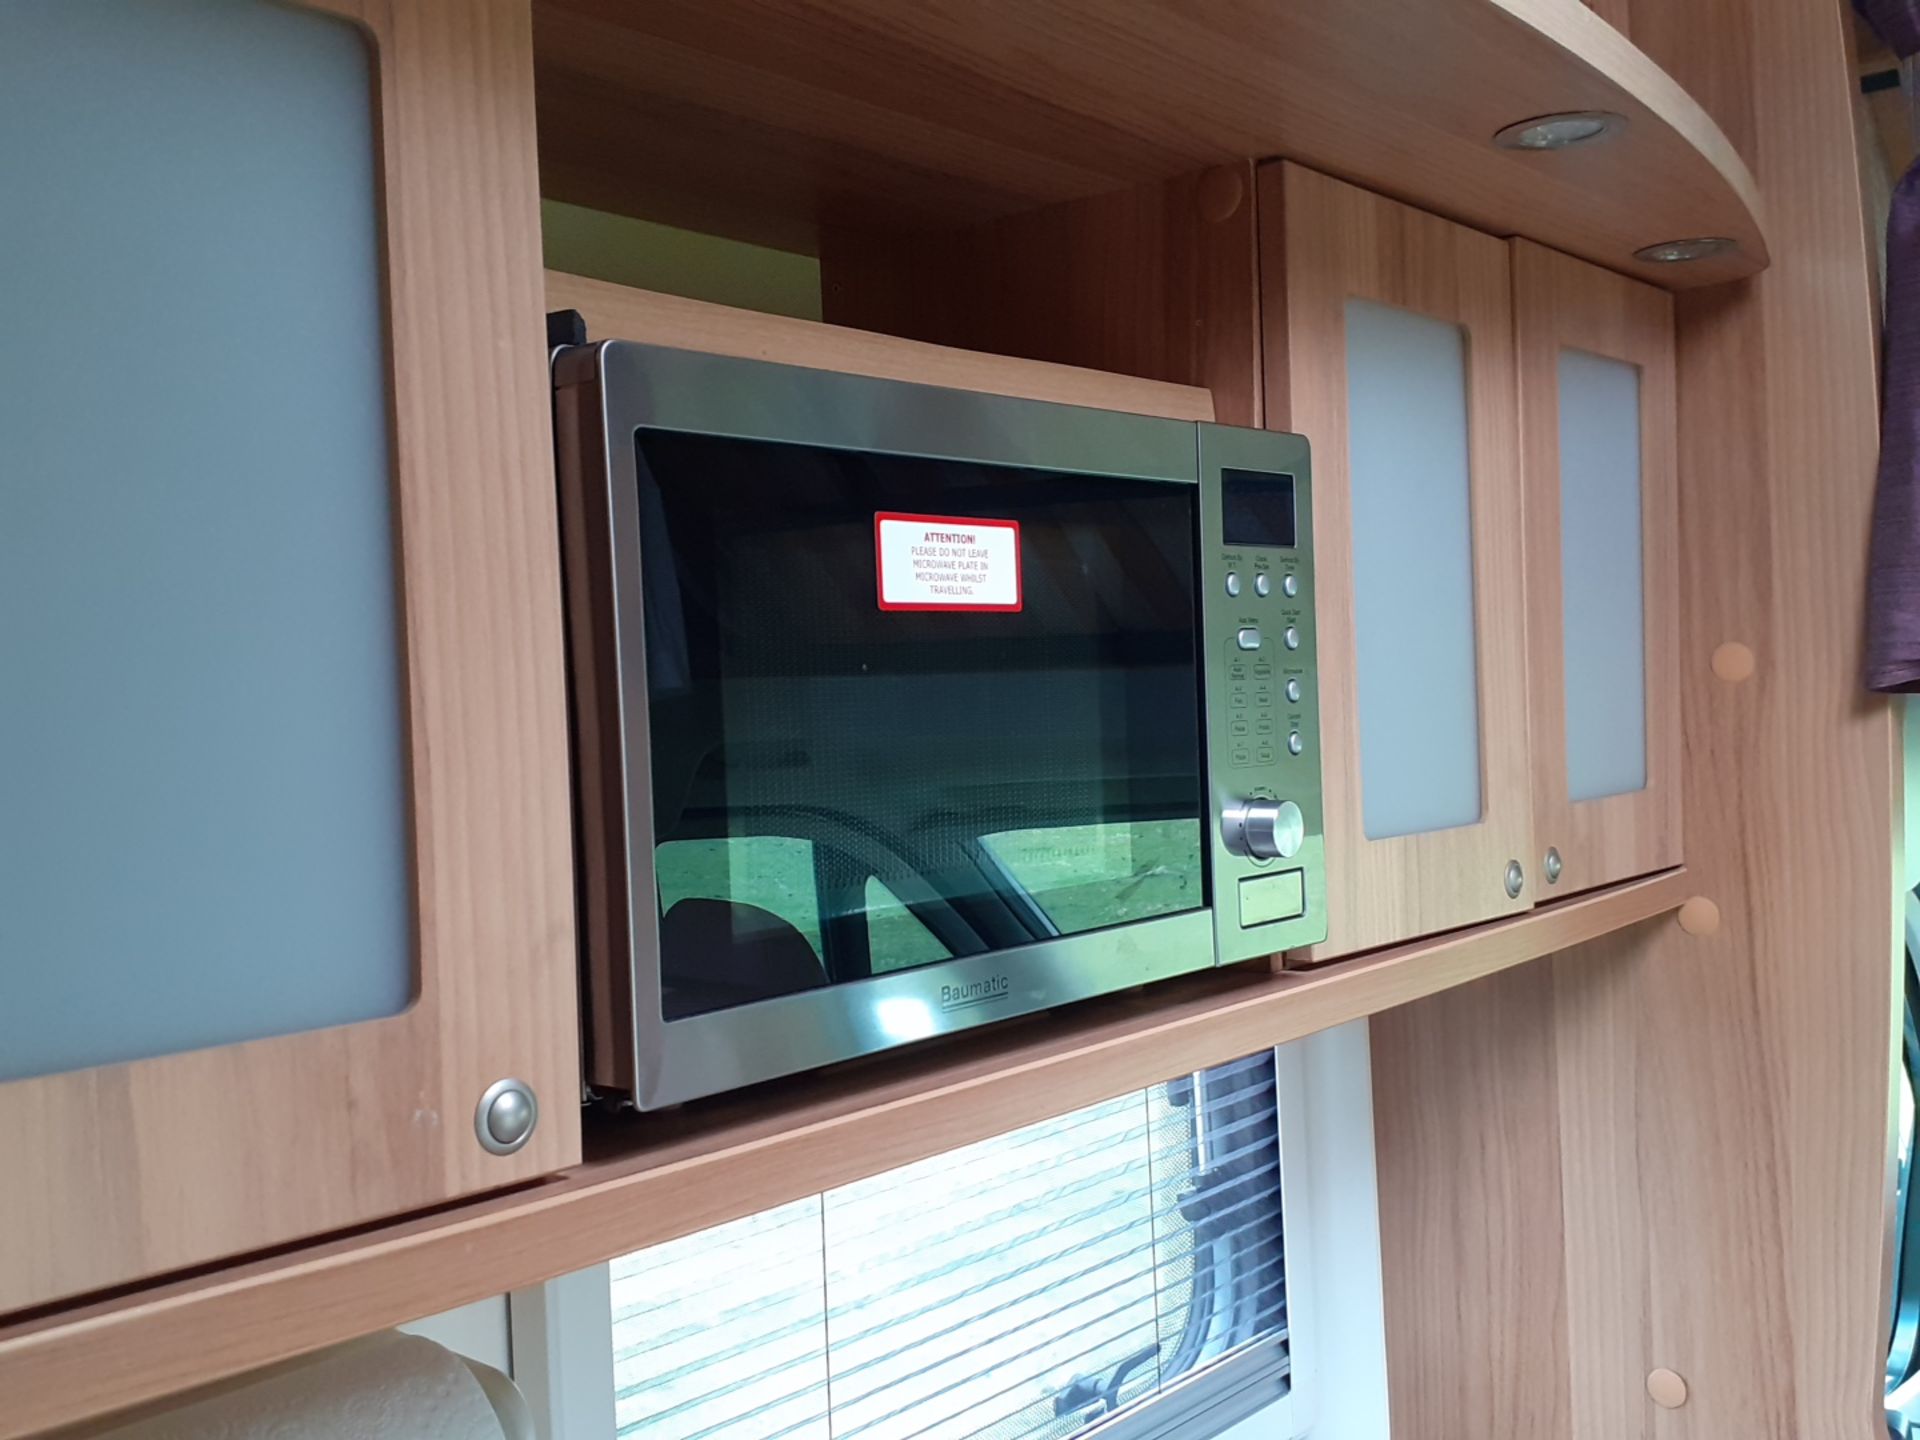 2012 BAILEY APPROACH 760 SE LUXURY 6 BERTH MOTORHOME £10K OF EXTRAS, 30,000 MILES FROM NEW - Image 19 of 31